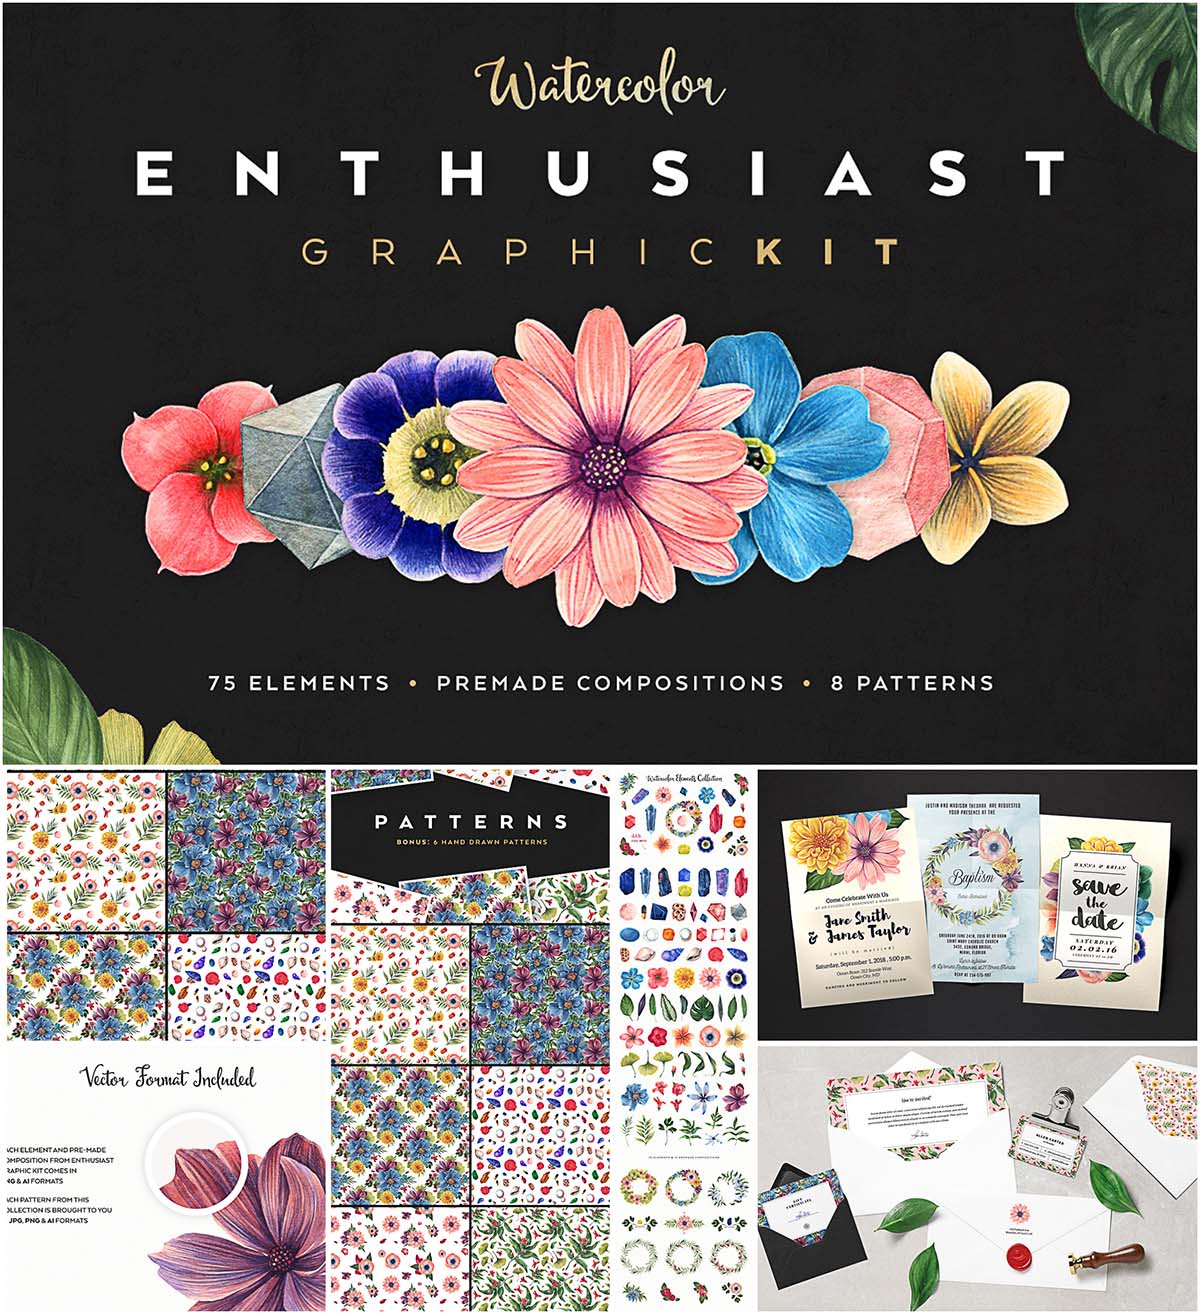 Watercolor enthusiast graphic kit